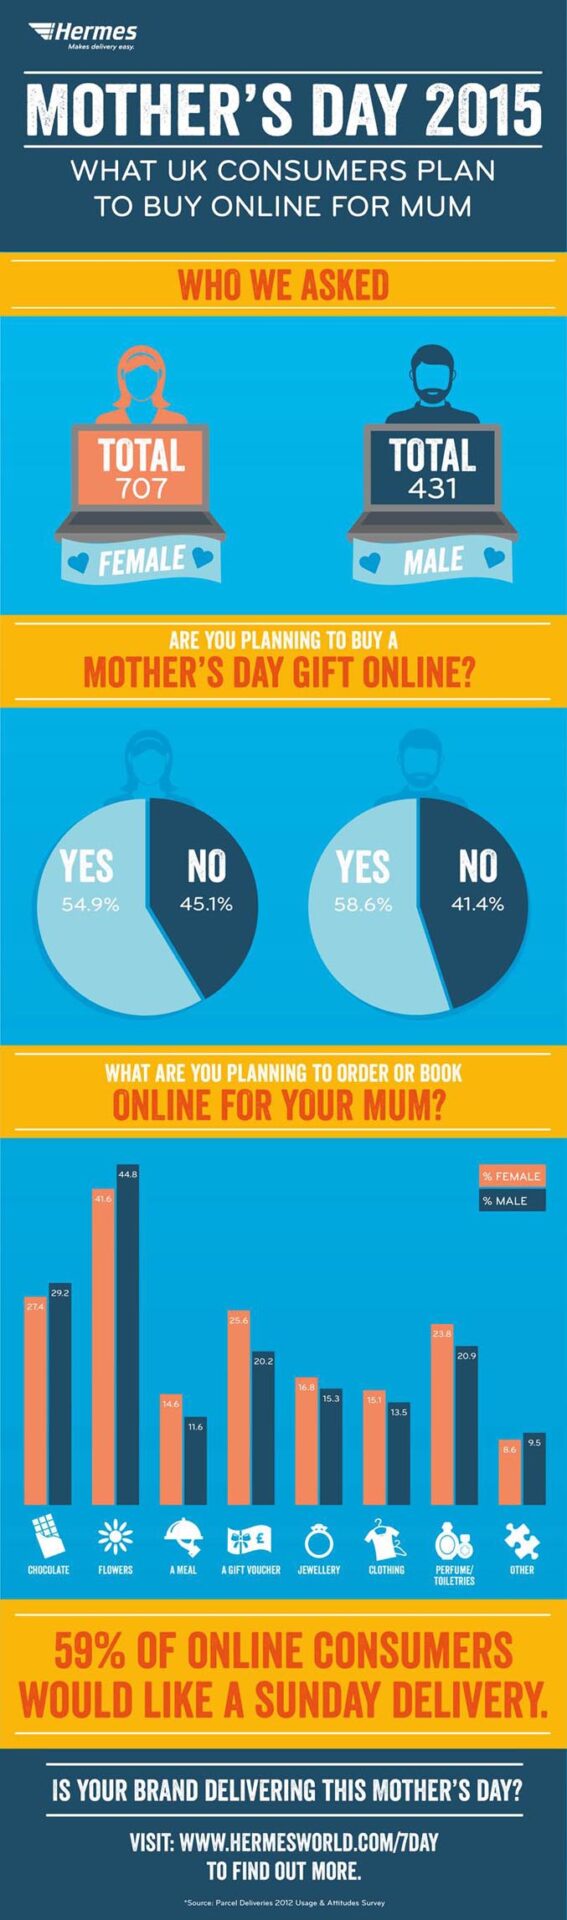 myHermes Mothers Day Infographic